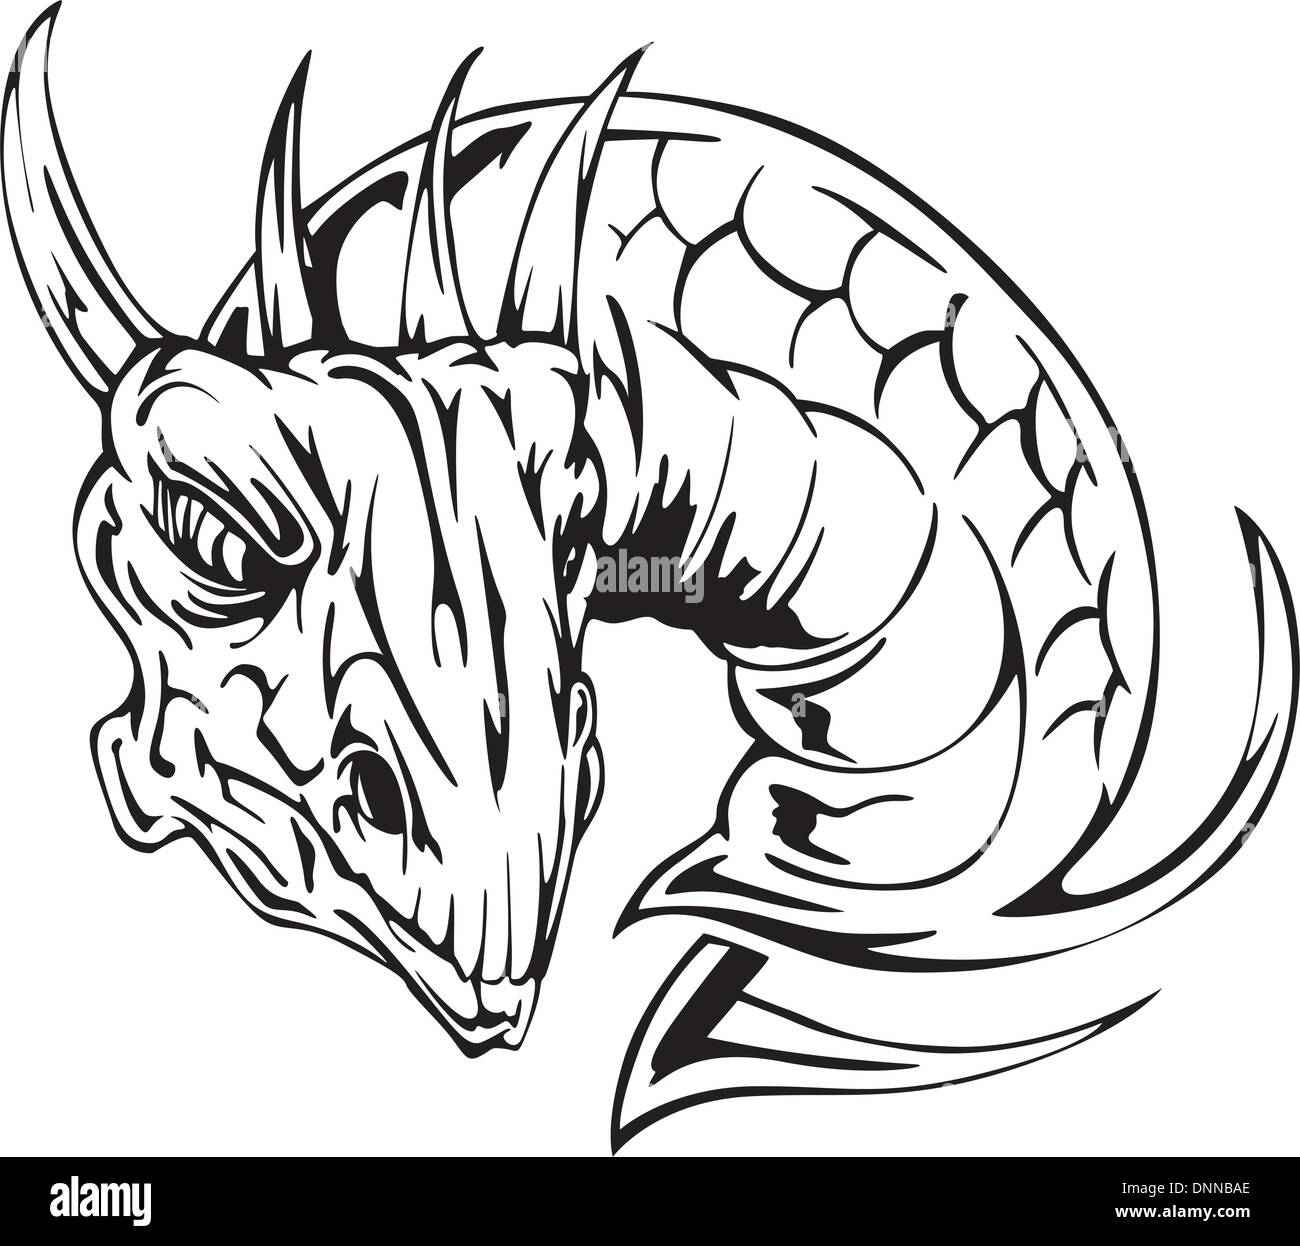 Dragon head tattoo. Back and white vector illustrations. Stock Vector